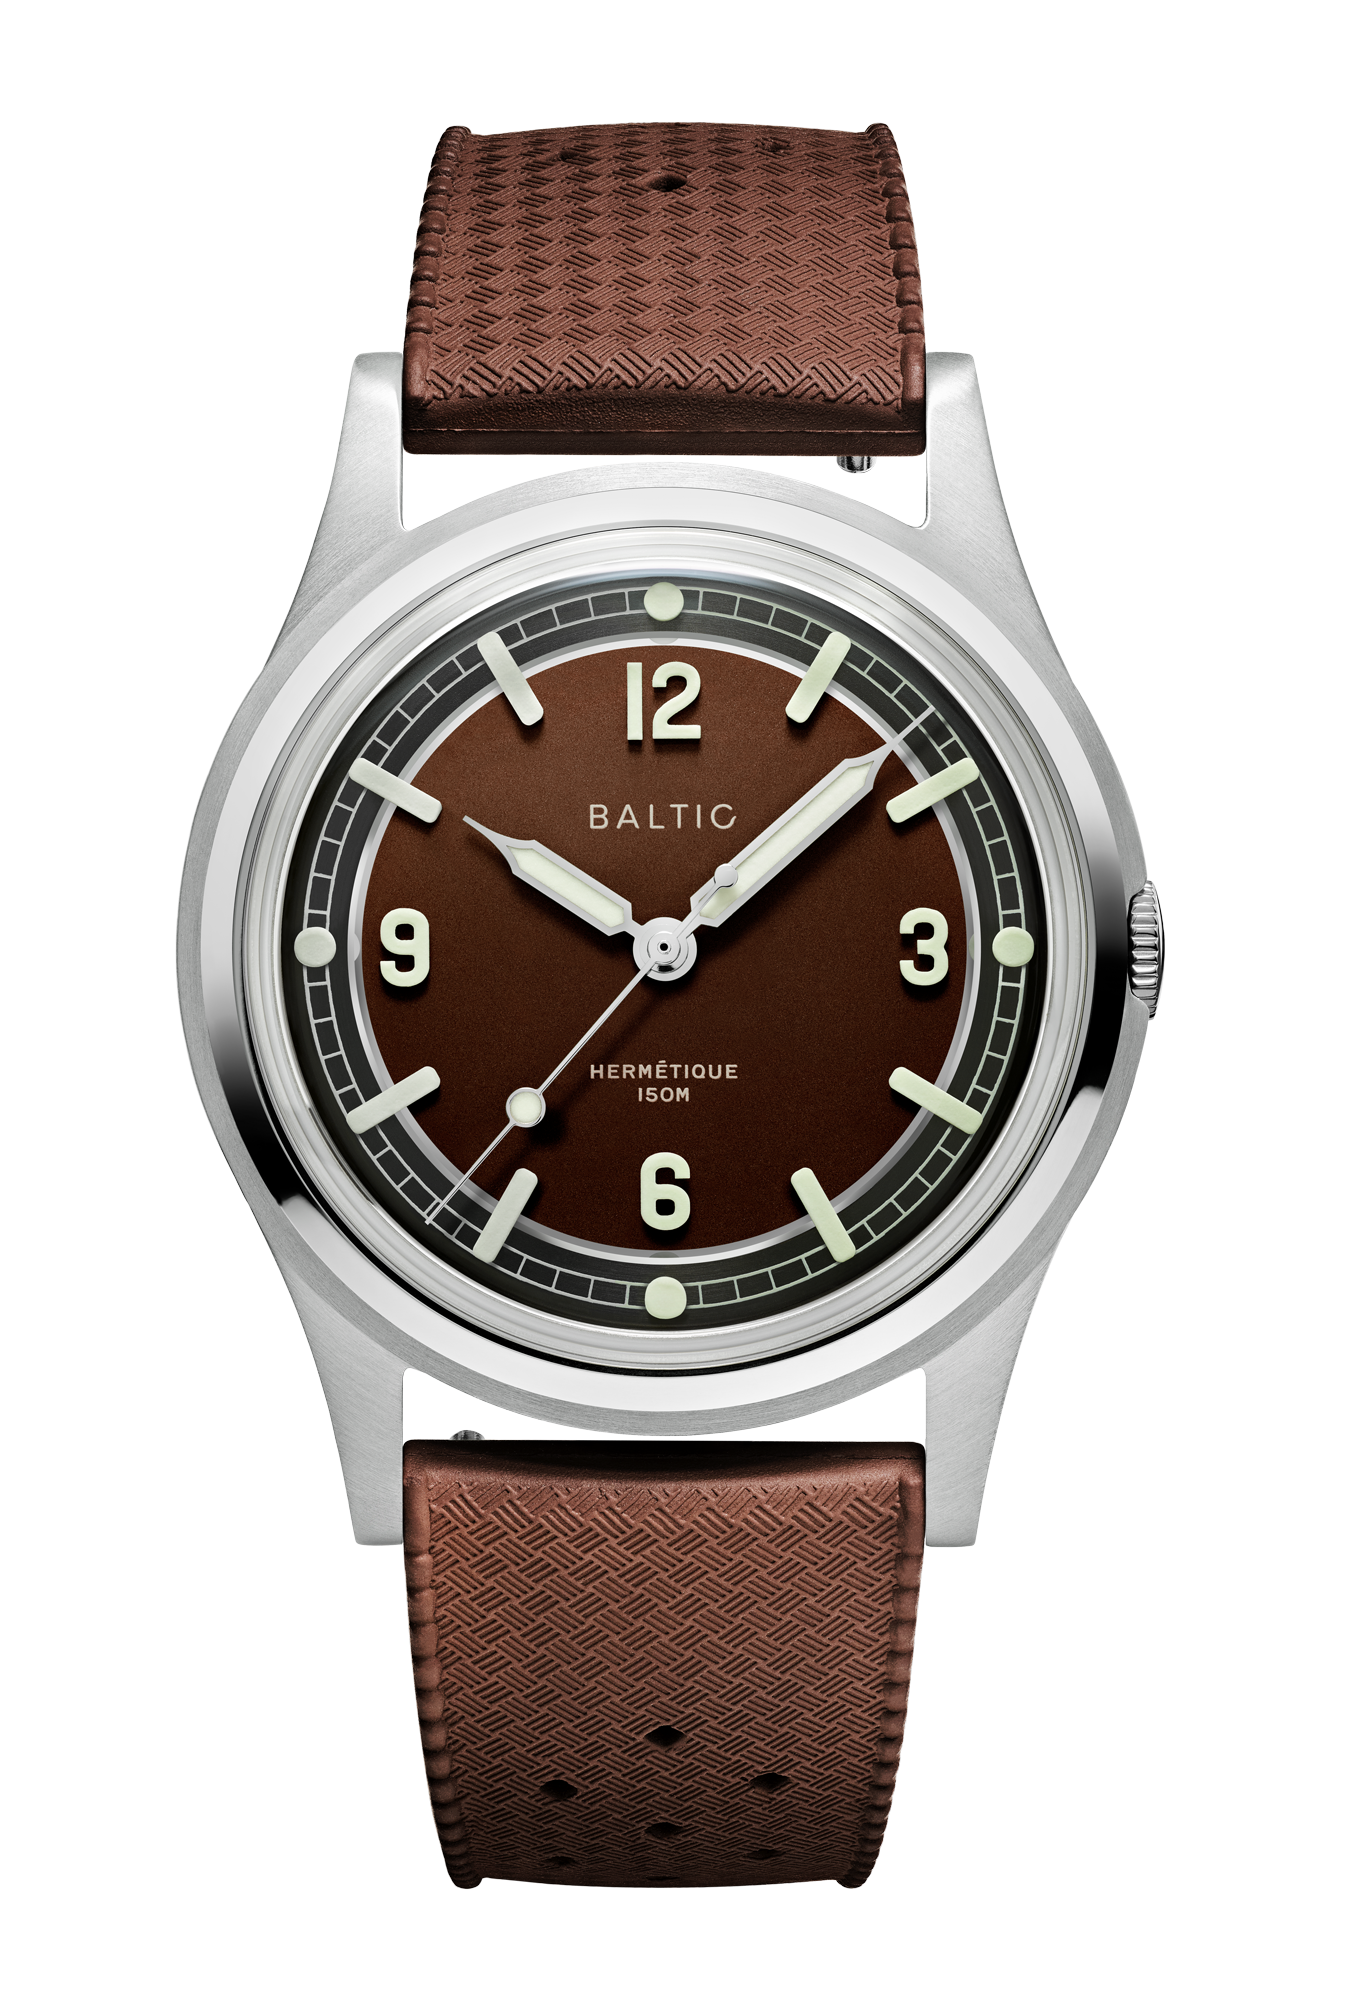 BALTIC Watches